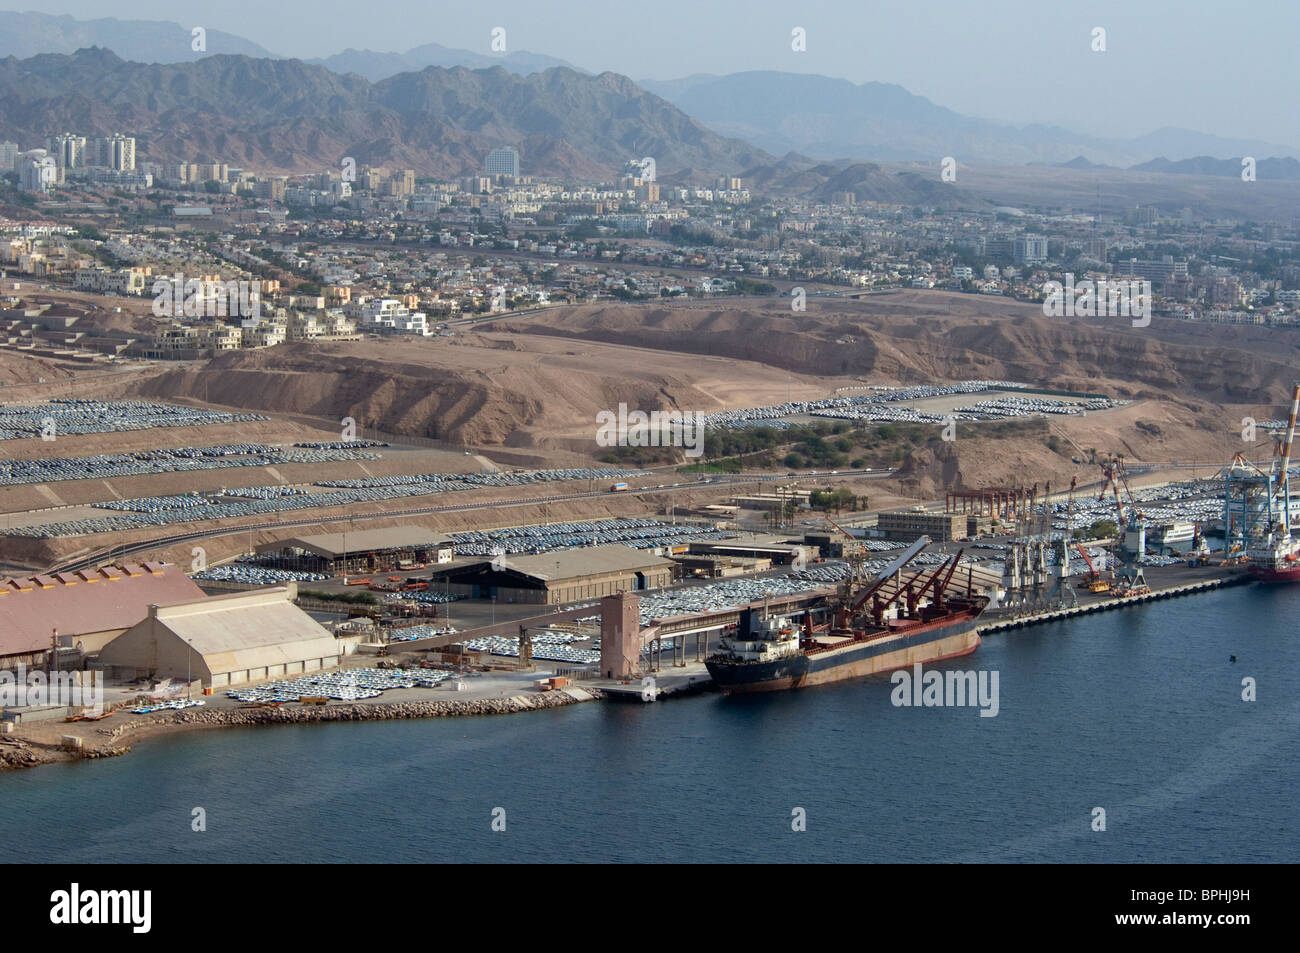 Aerial Views of Eilat Israel-Port and City Stock Photo